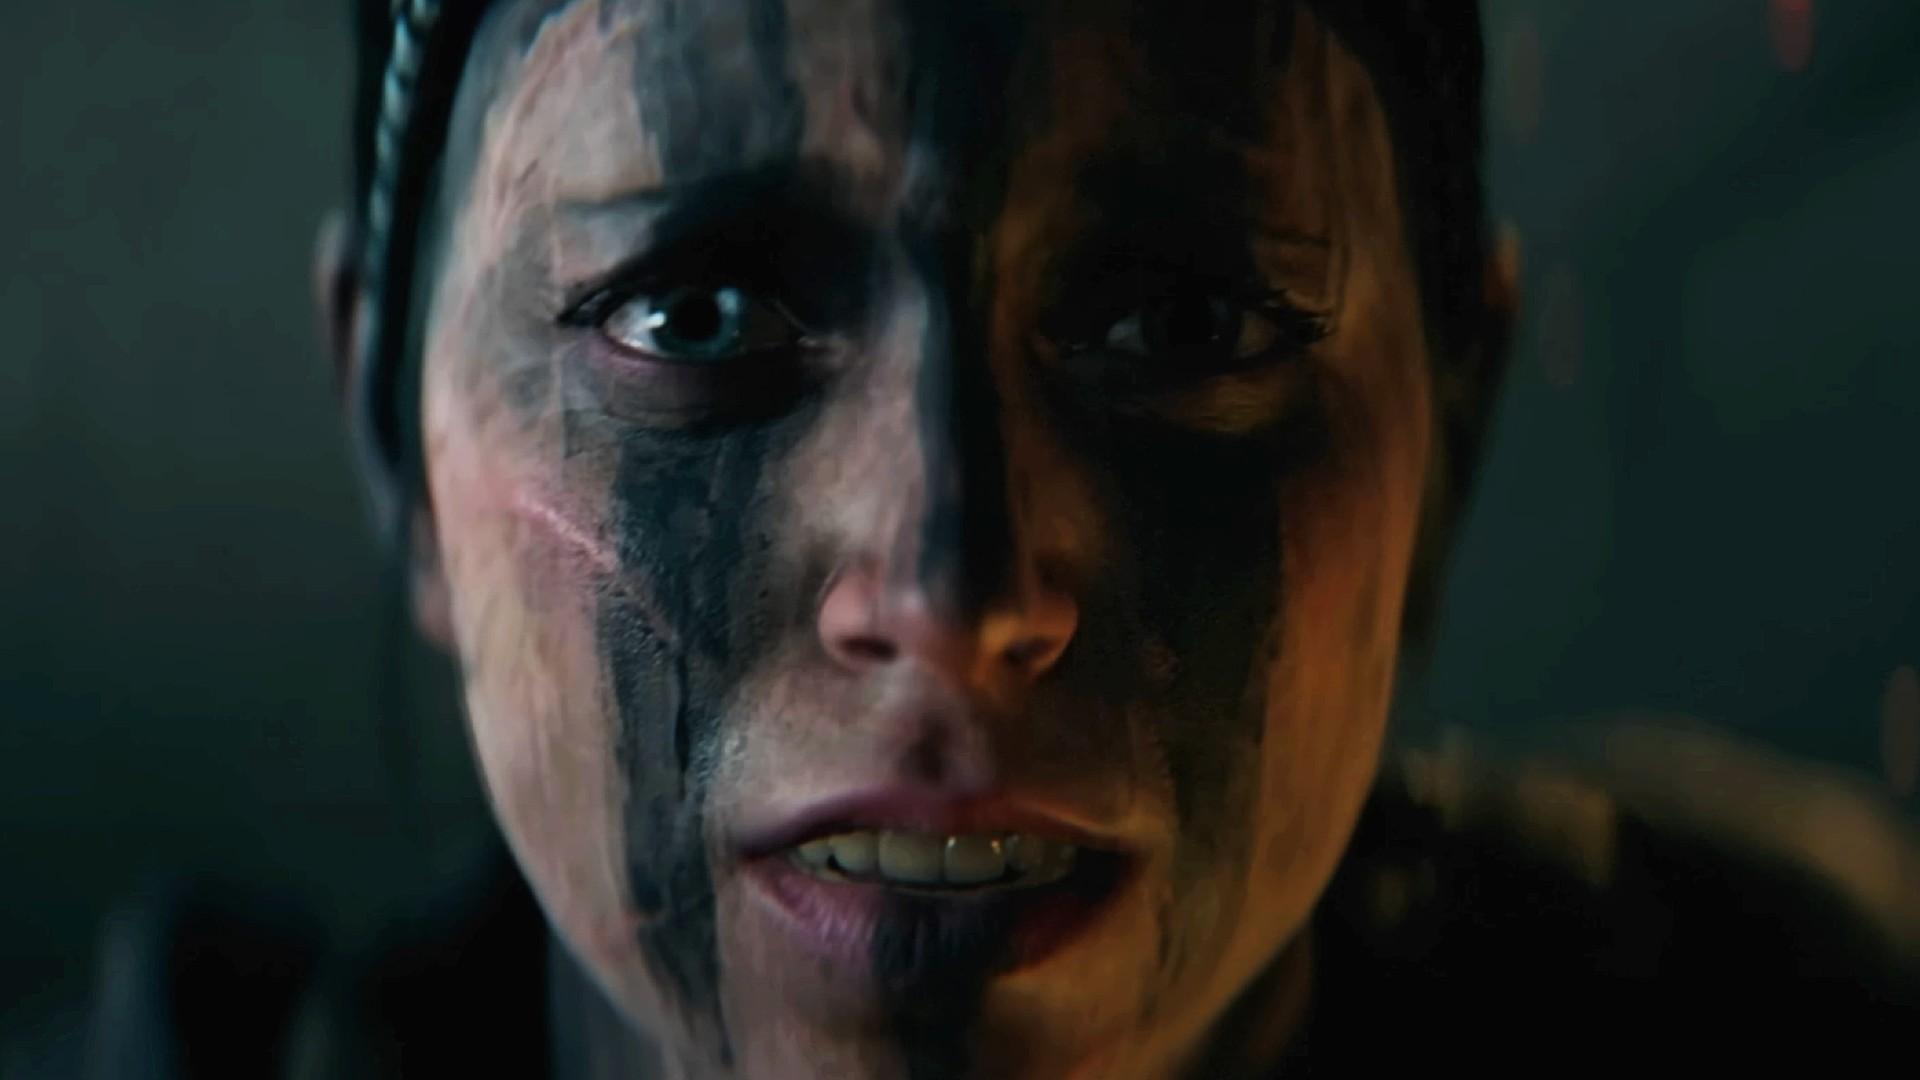 Hellblade 2 PC: Will computer gamers be able to play Senua's Saga? Trailer,  Plot, Release date, Characters & more